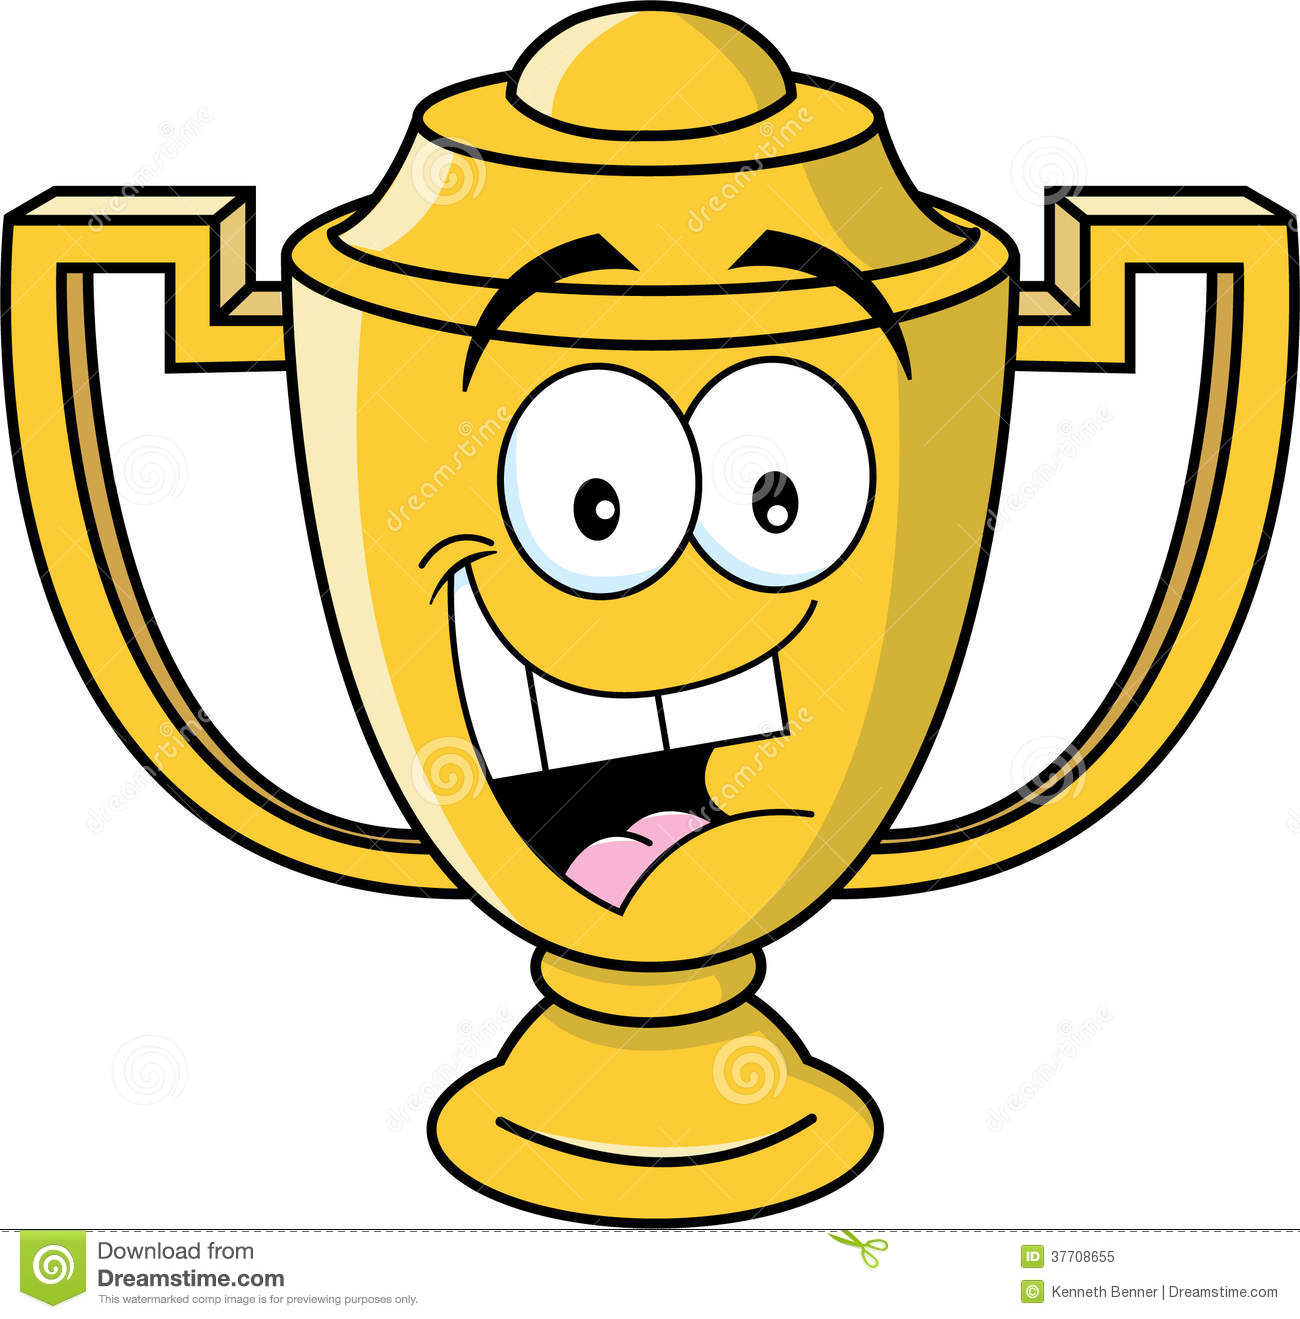 Cartoon Smiling Trophy Cup Royalty Free Stock Photo   Image  37708655